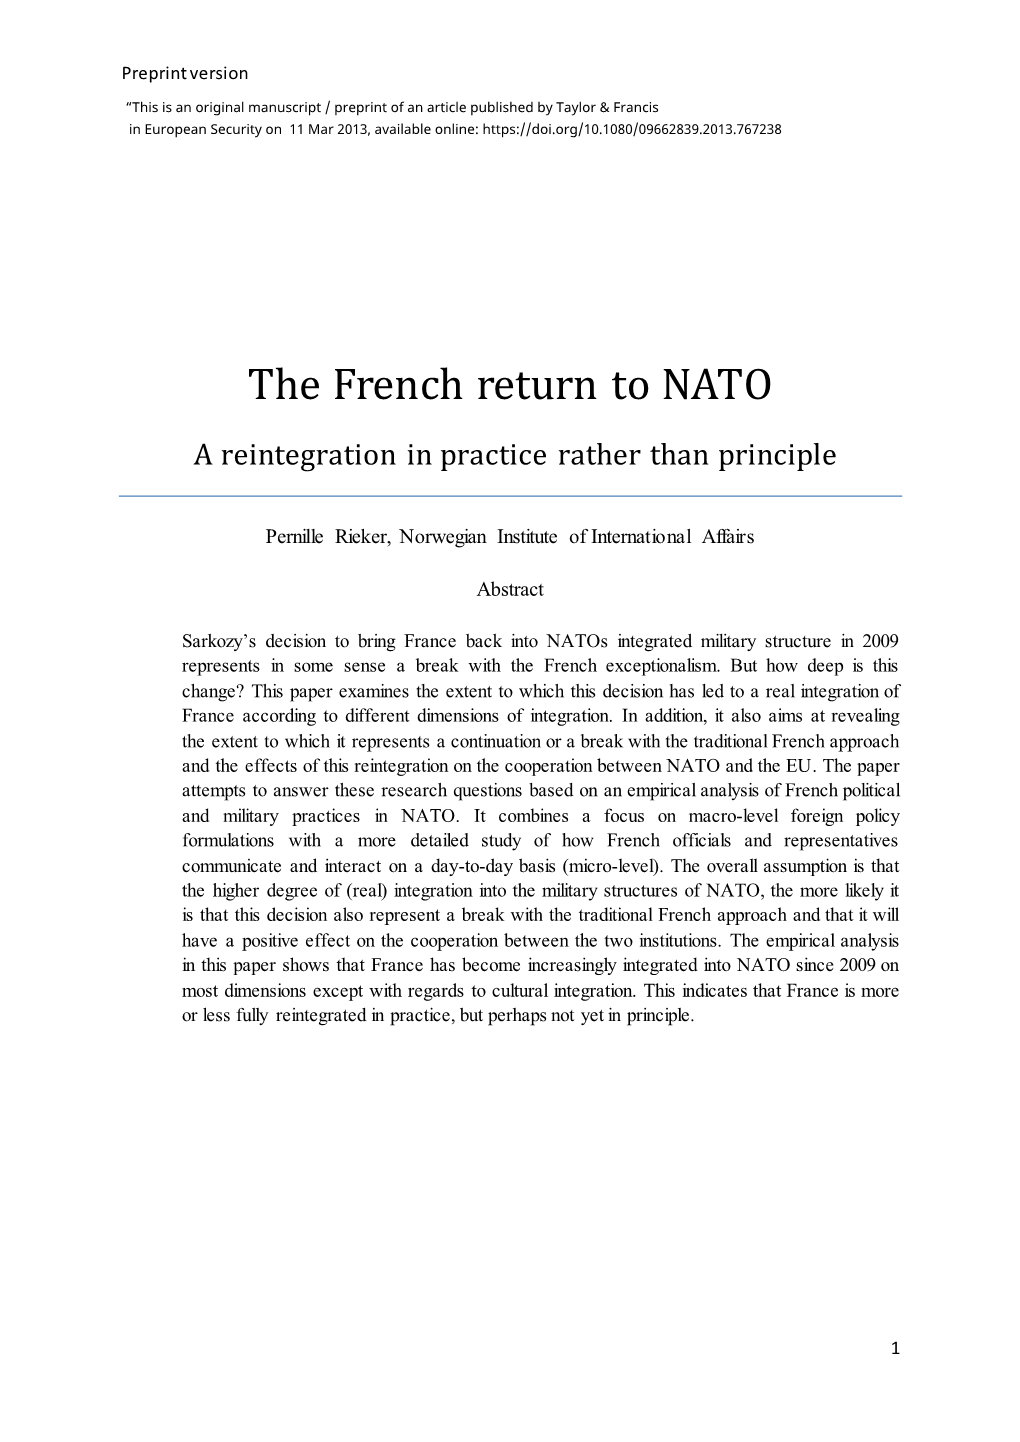 The French Return to NATO a Reintegration in Practice Rather Than Principle